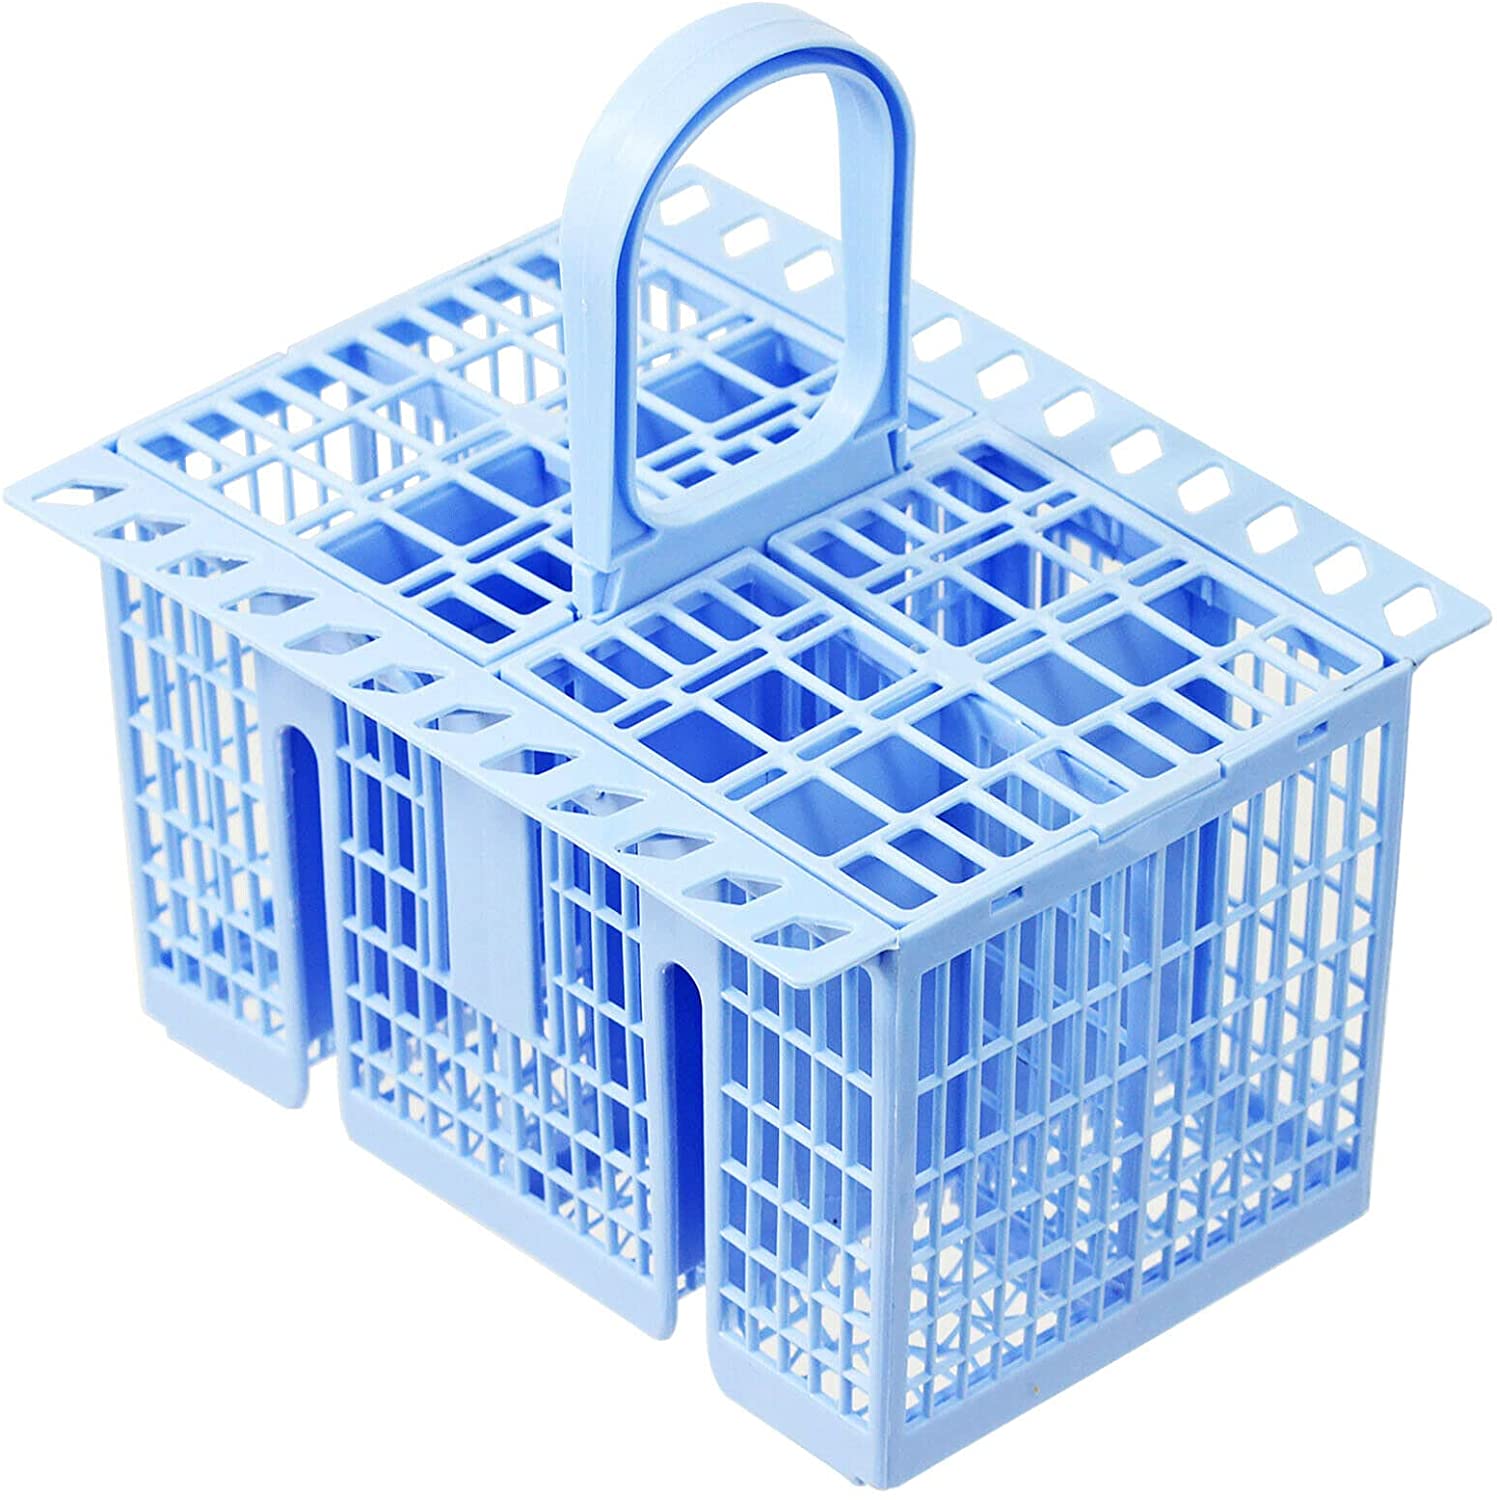 SPARES2GO Cutlery Basket compatible with Samsung Dishwasher (Blue, 220 x 208 x 160mm)